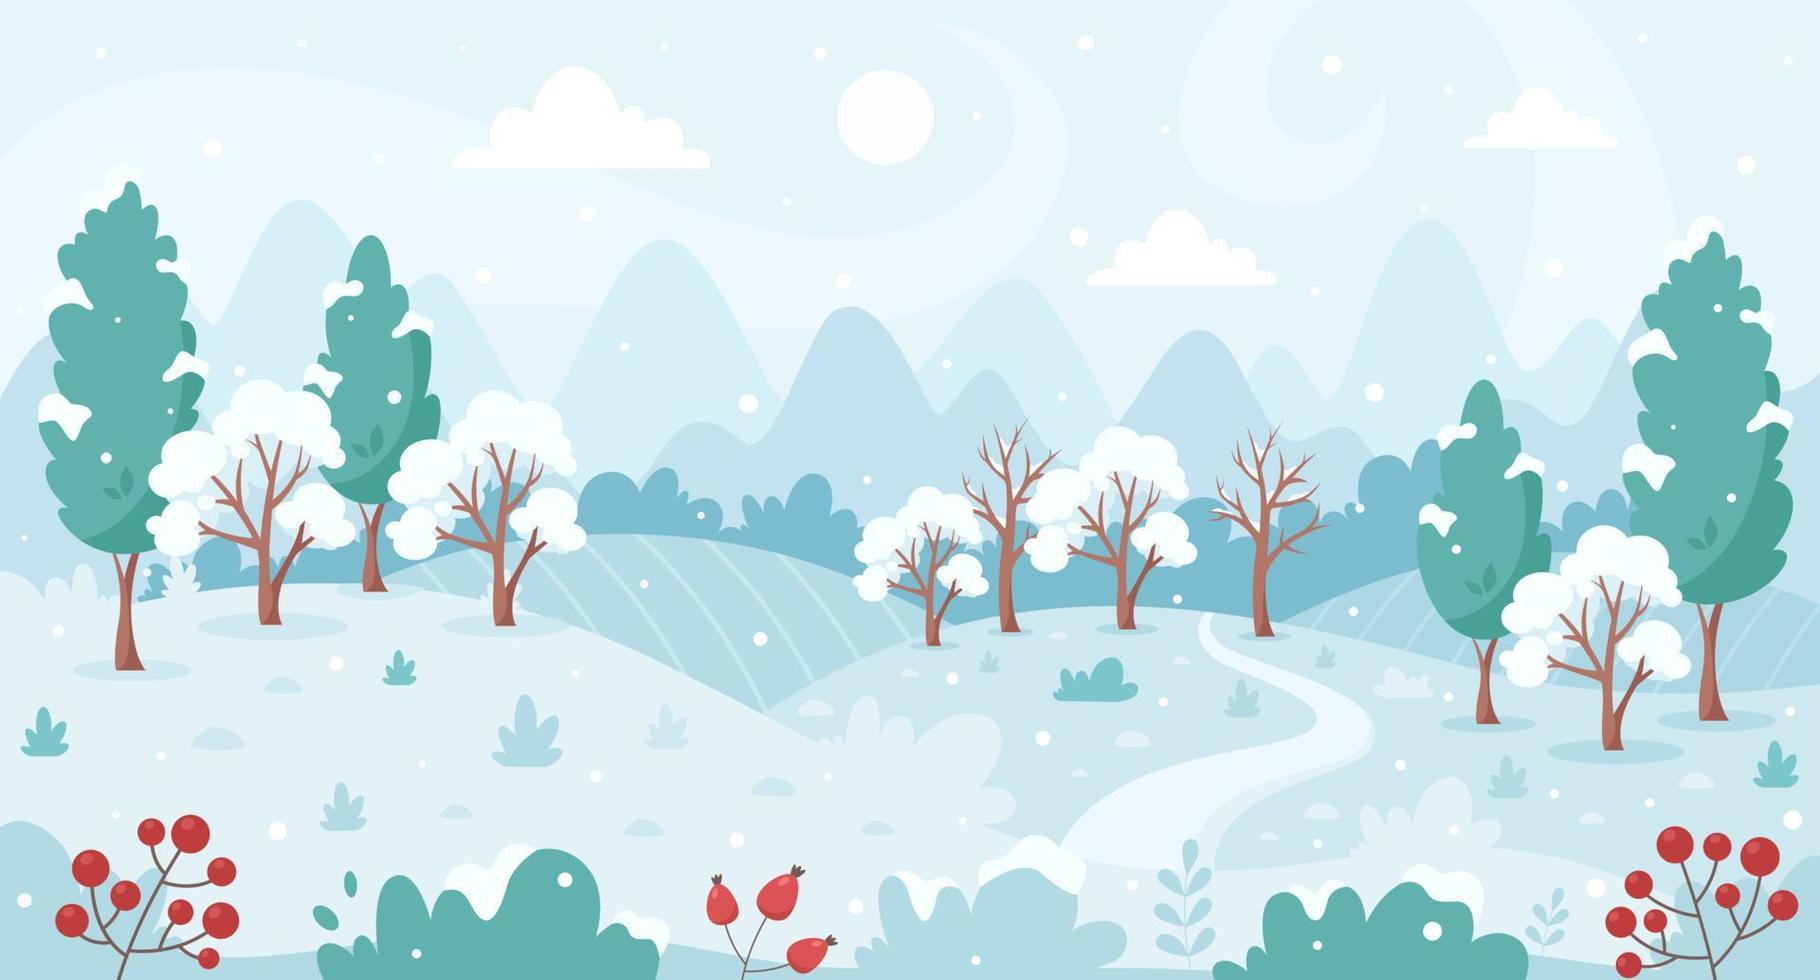 Snowy winter landscape with trees, mountains. Countryside landscape vector